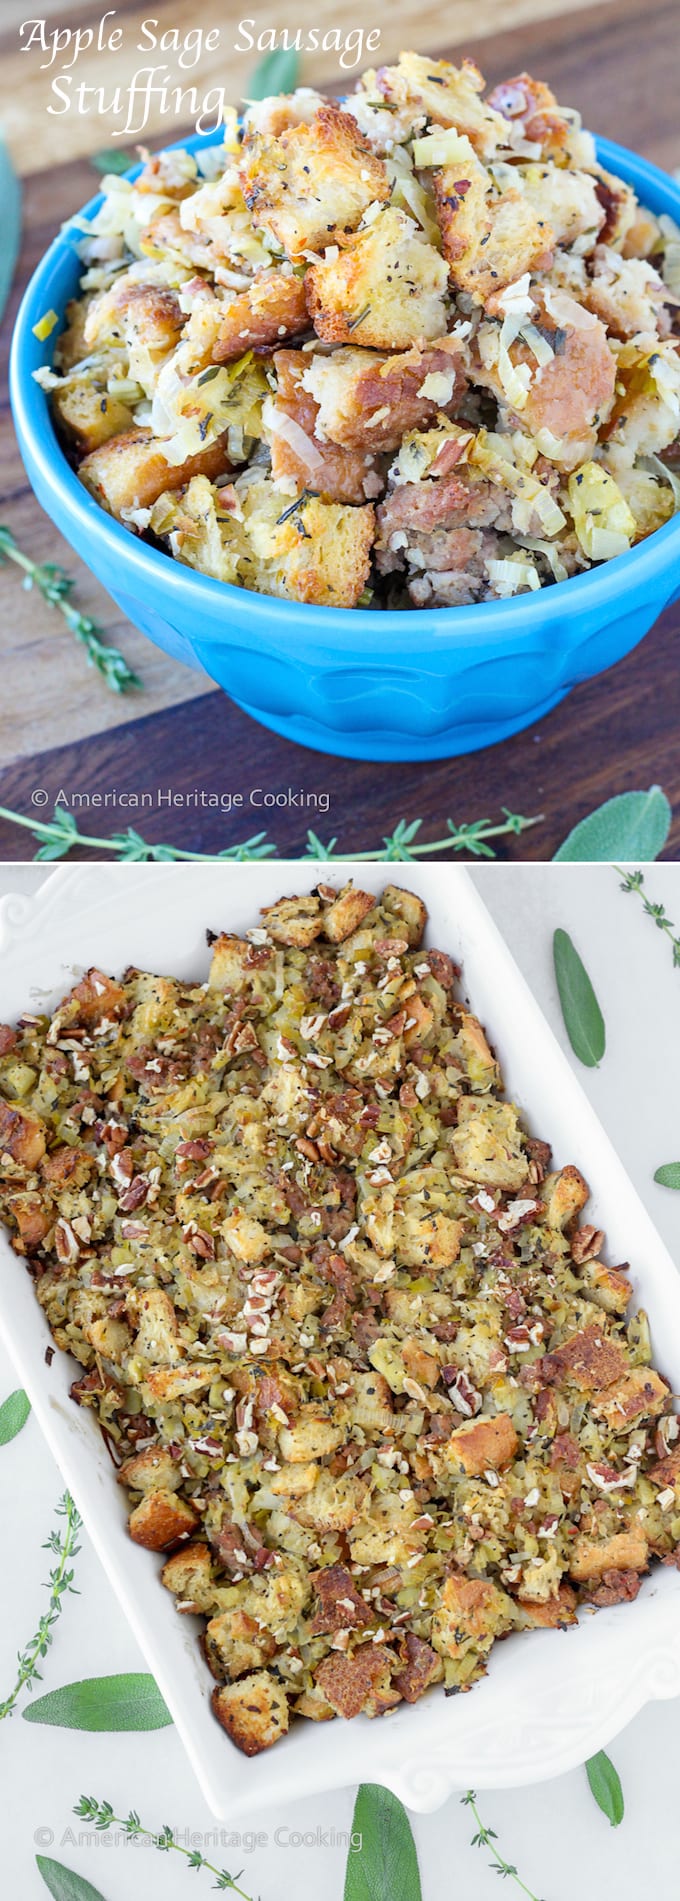 Apple sage sausage stuffing serving in a bright blue bowl and before serving in a white baking dish.